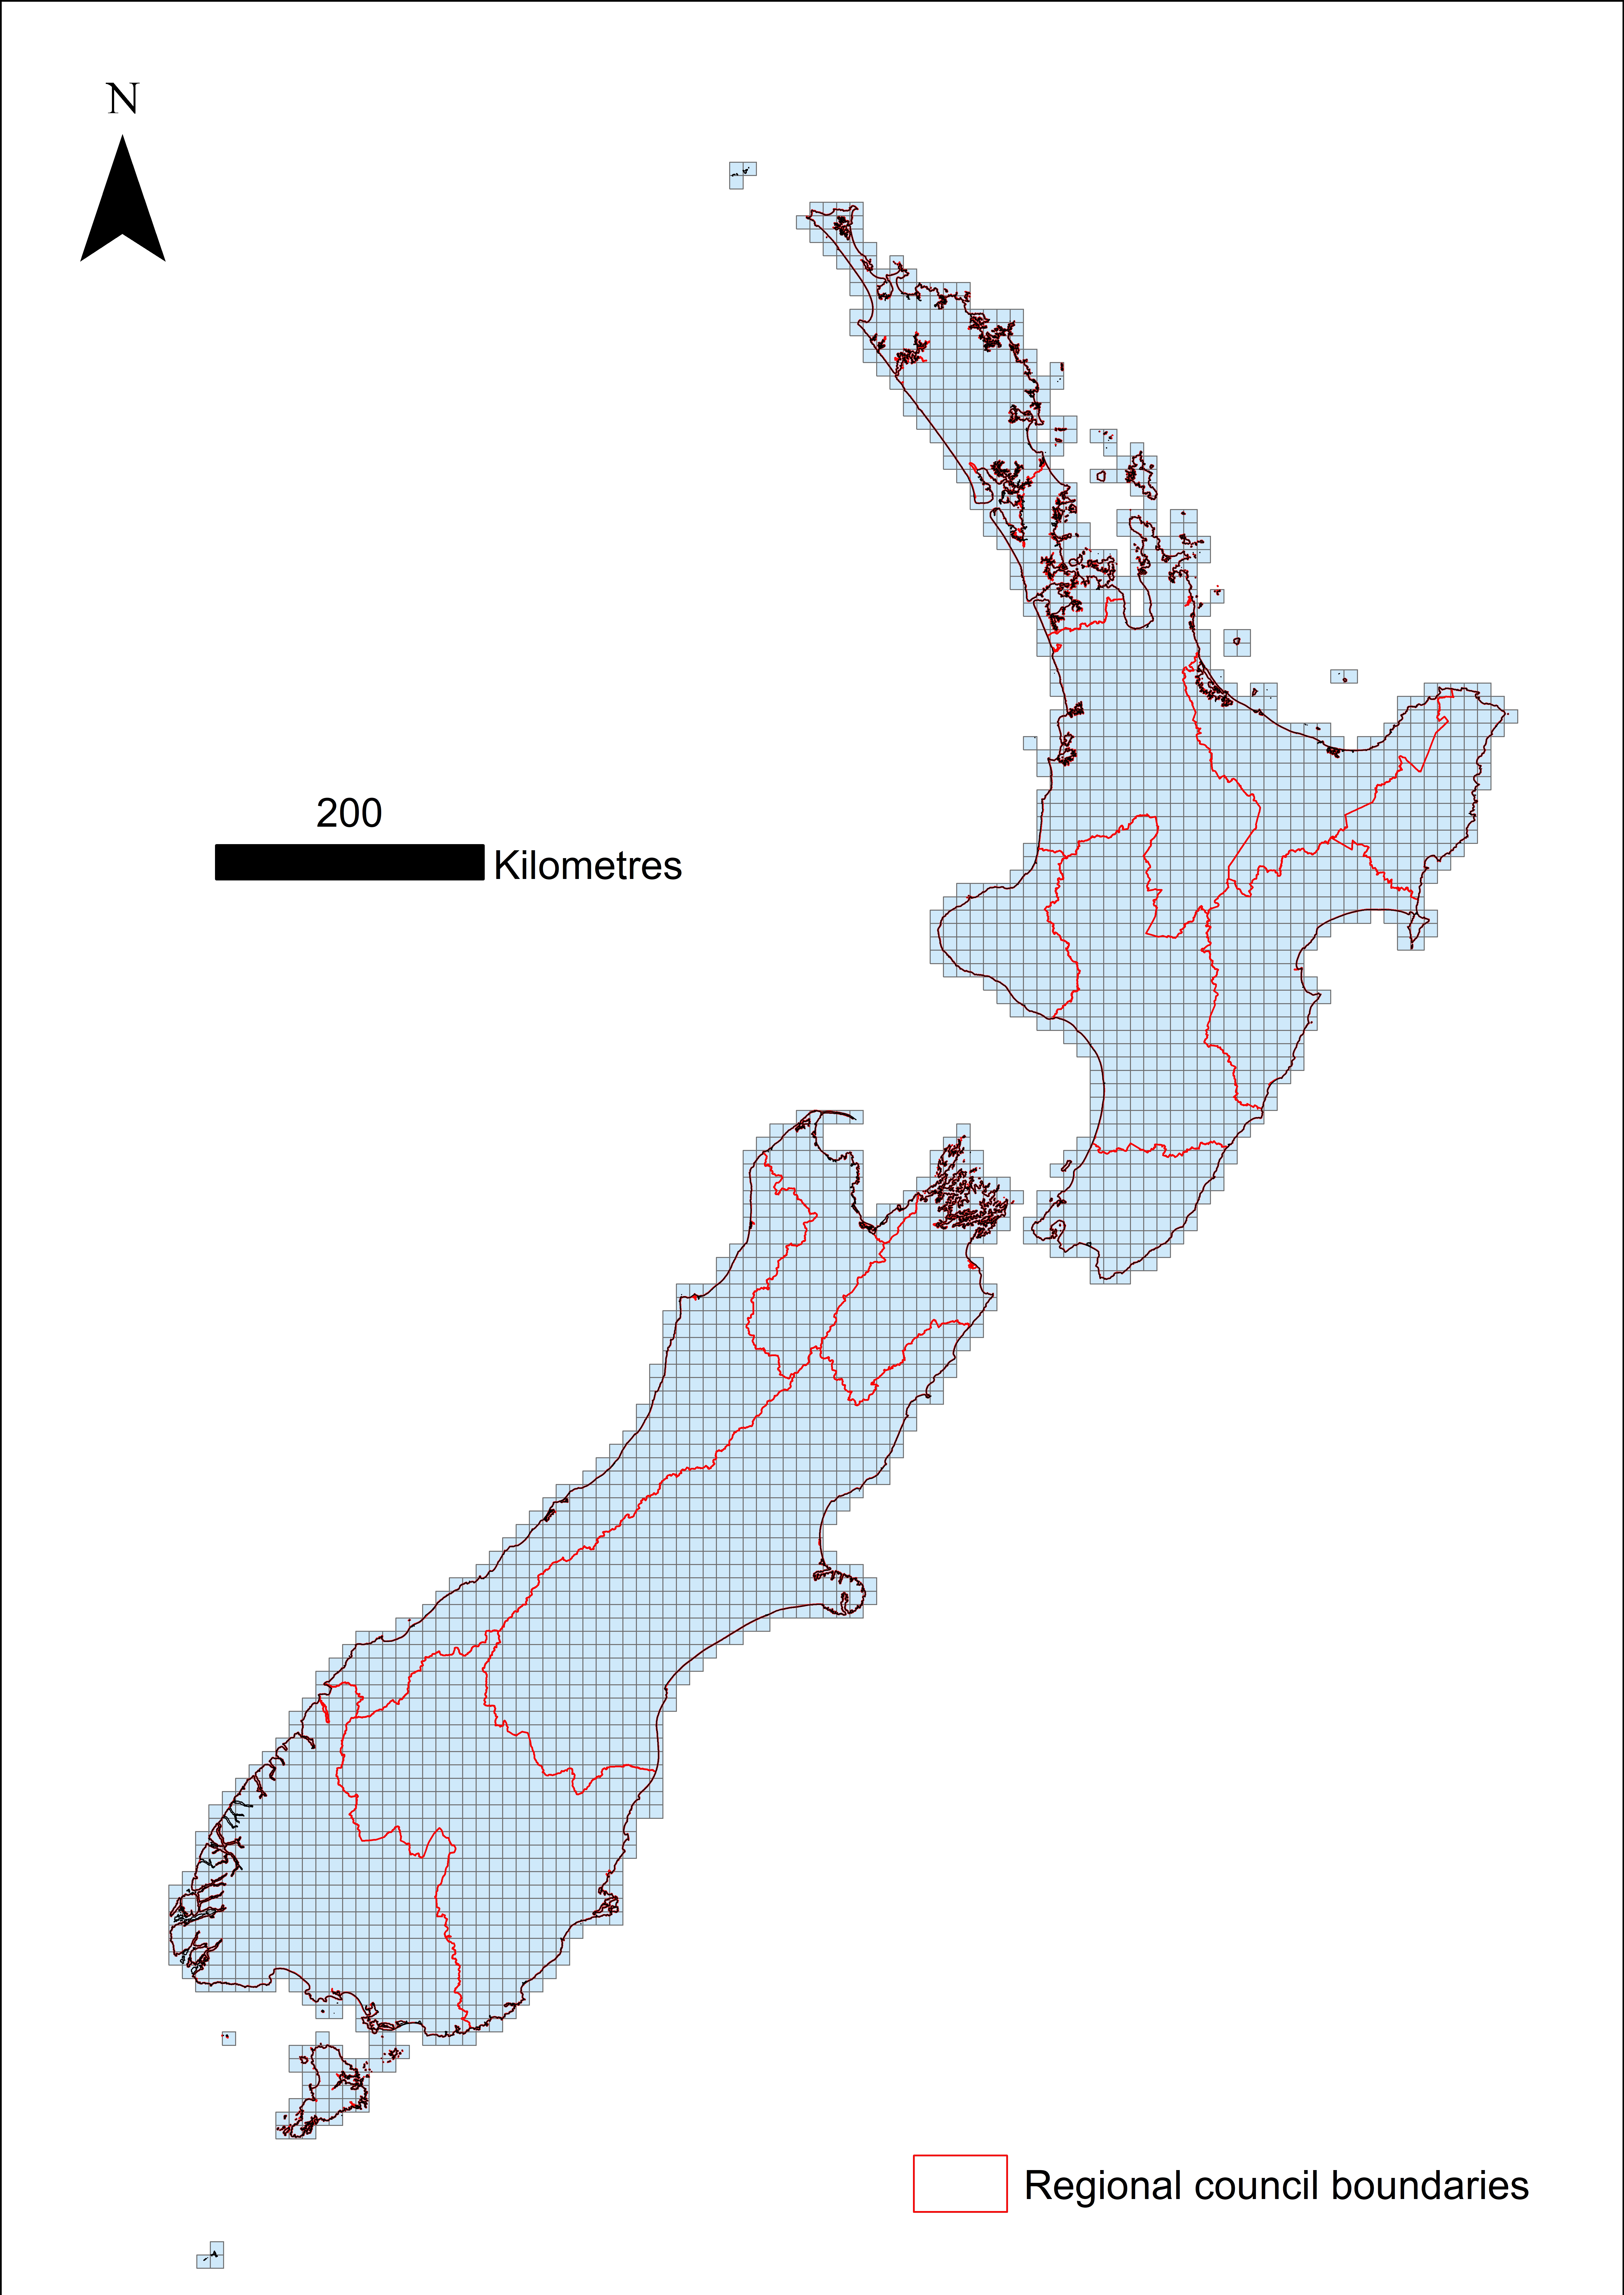 New Zealand has been divided up into a grid of 10 km squares for the Bird Atlas survey.